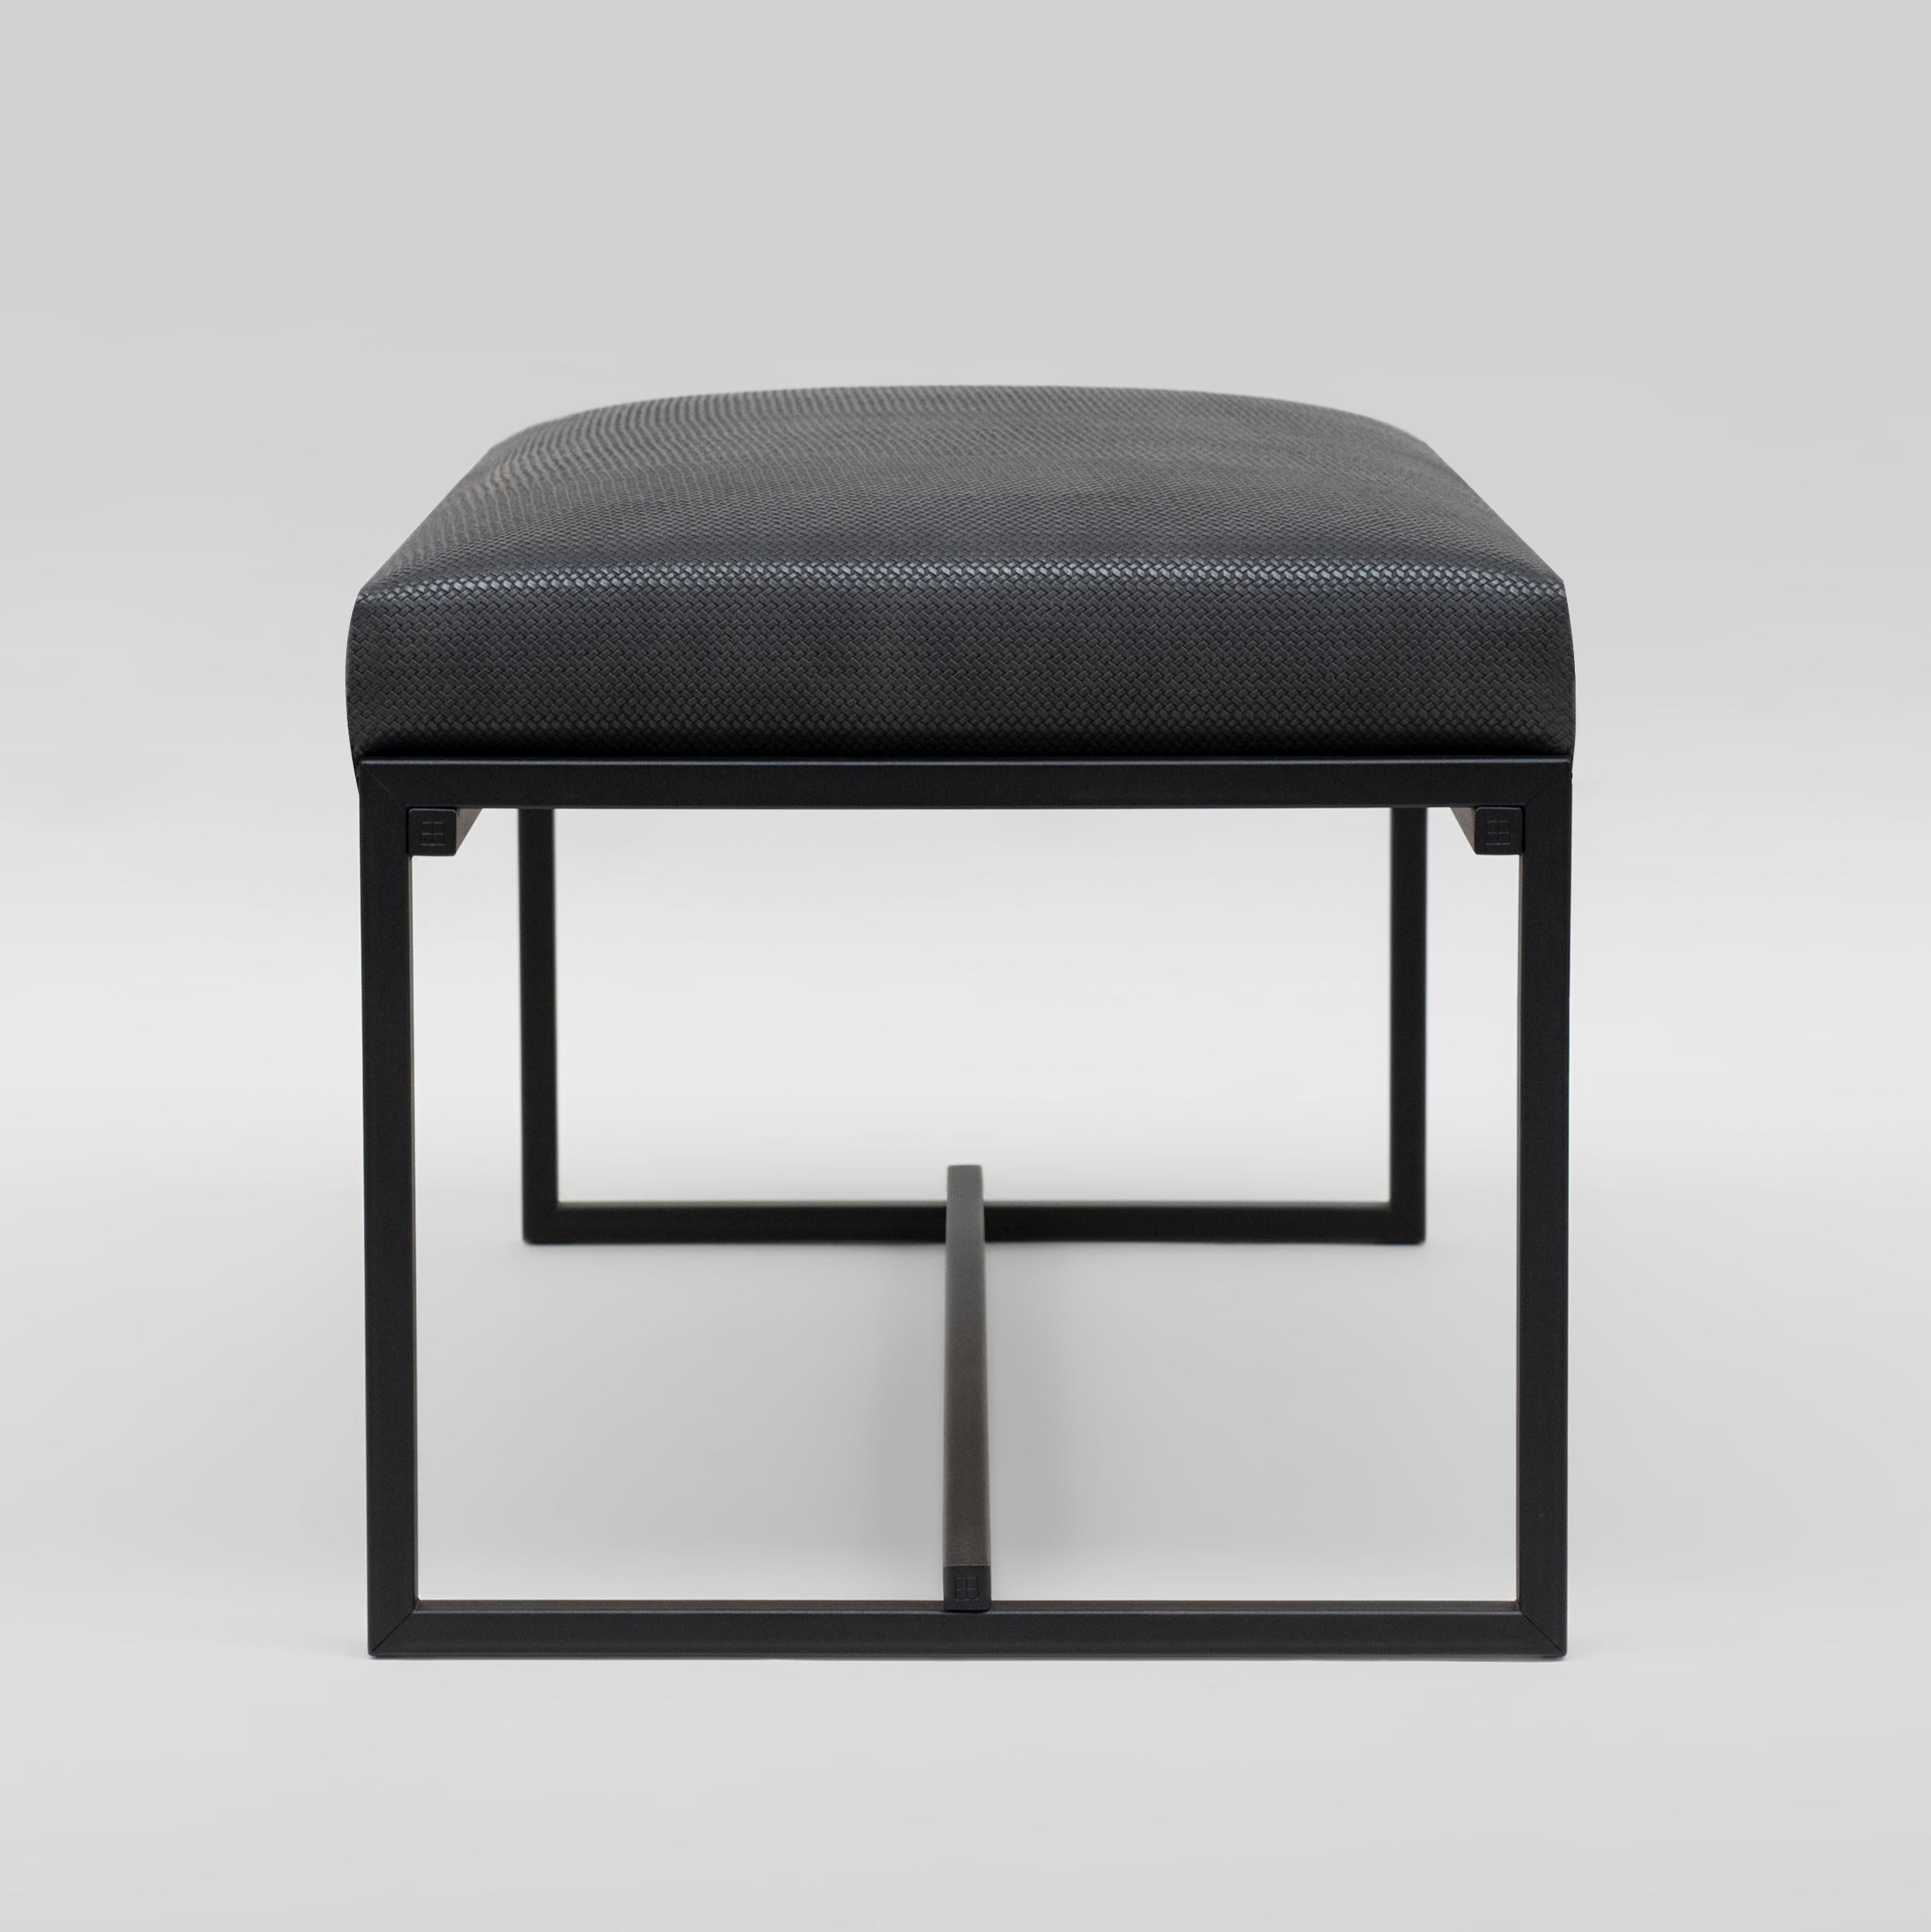 Powder-Coated Peter Ghyczy Bench Urban Grace 'GB03' Charcoal / Texturized Dark Fabric